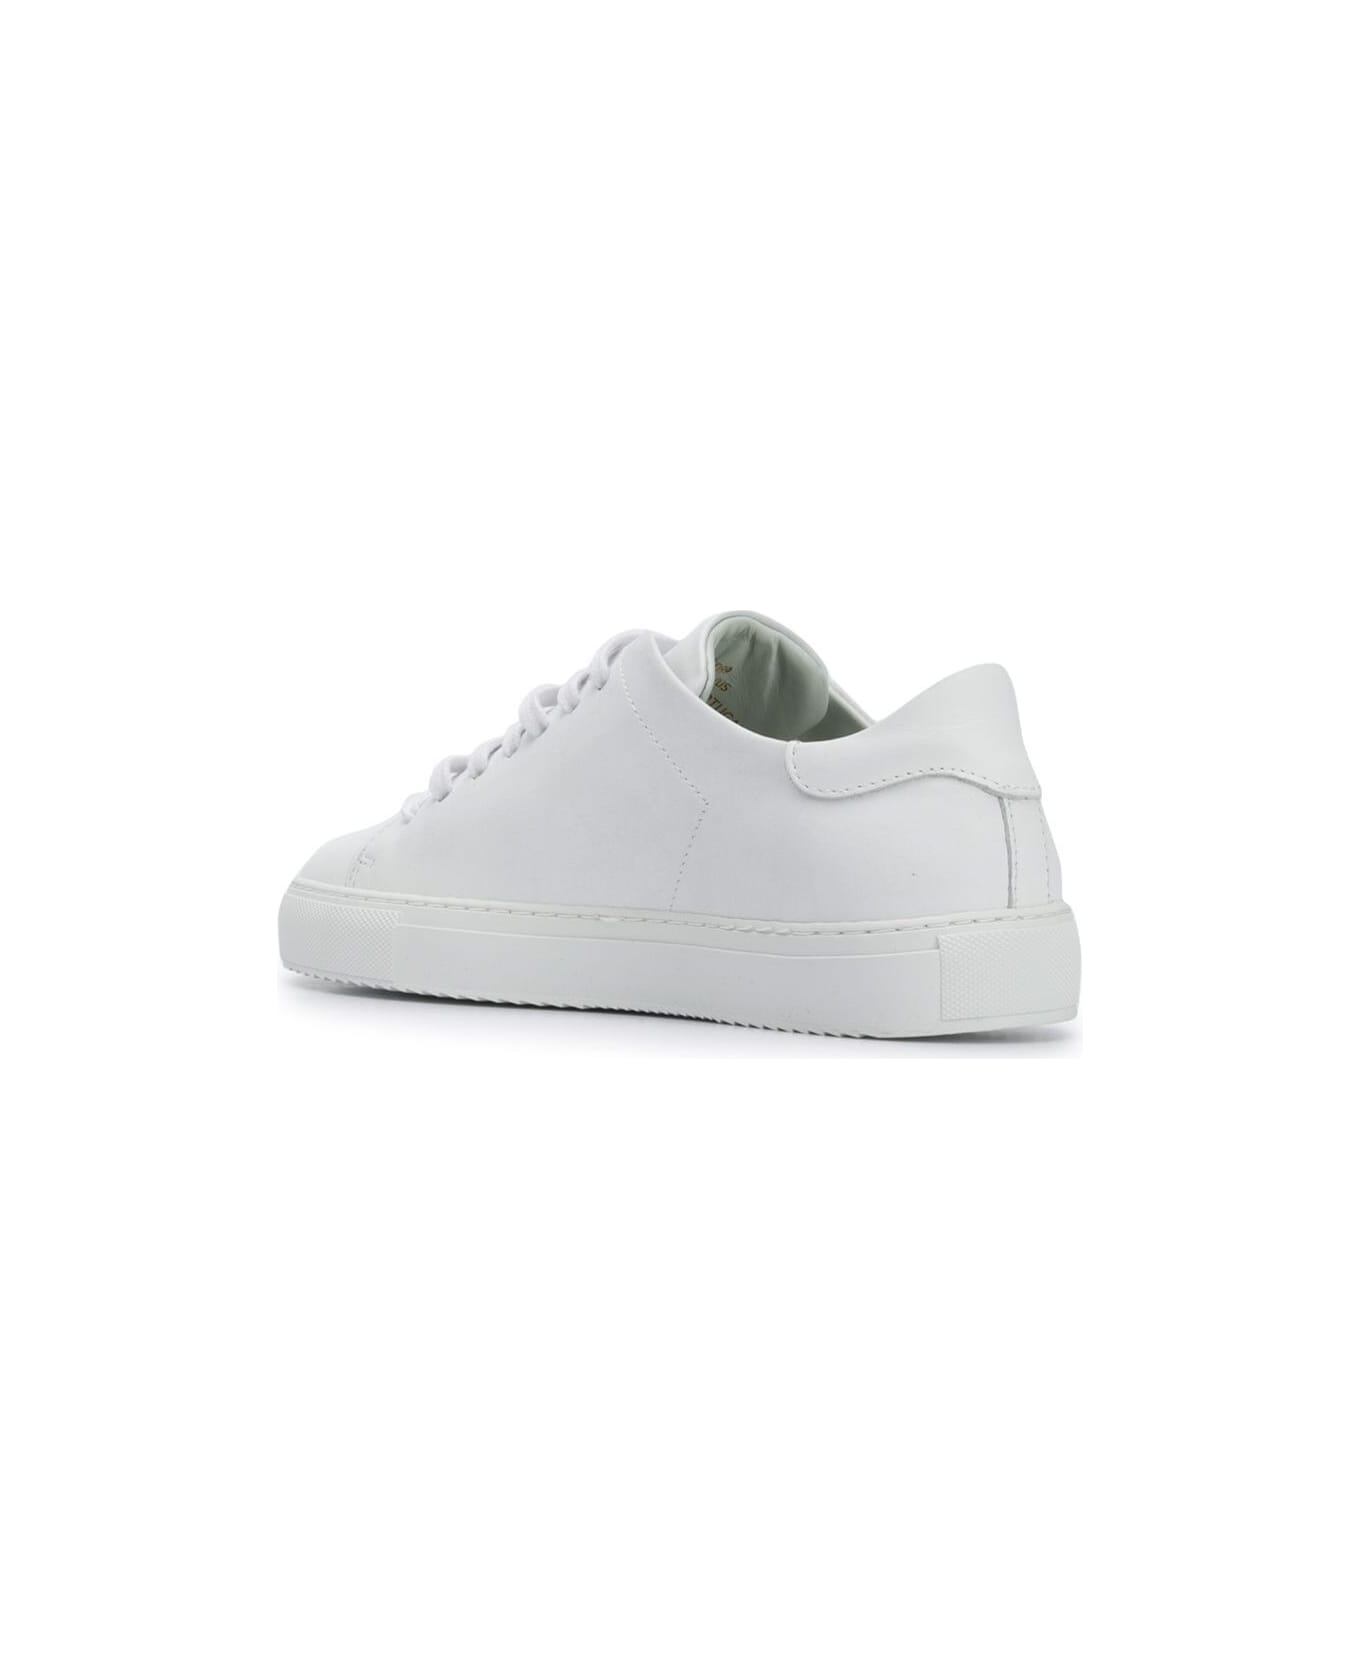 Axel Arigato 'clean 90' White Sneakers With Printed Logo In Leather Woman Axel Arigato - White スニーカー